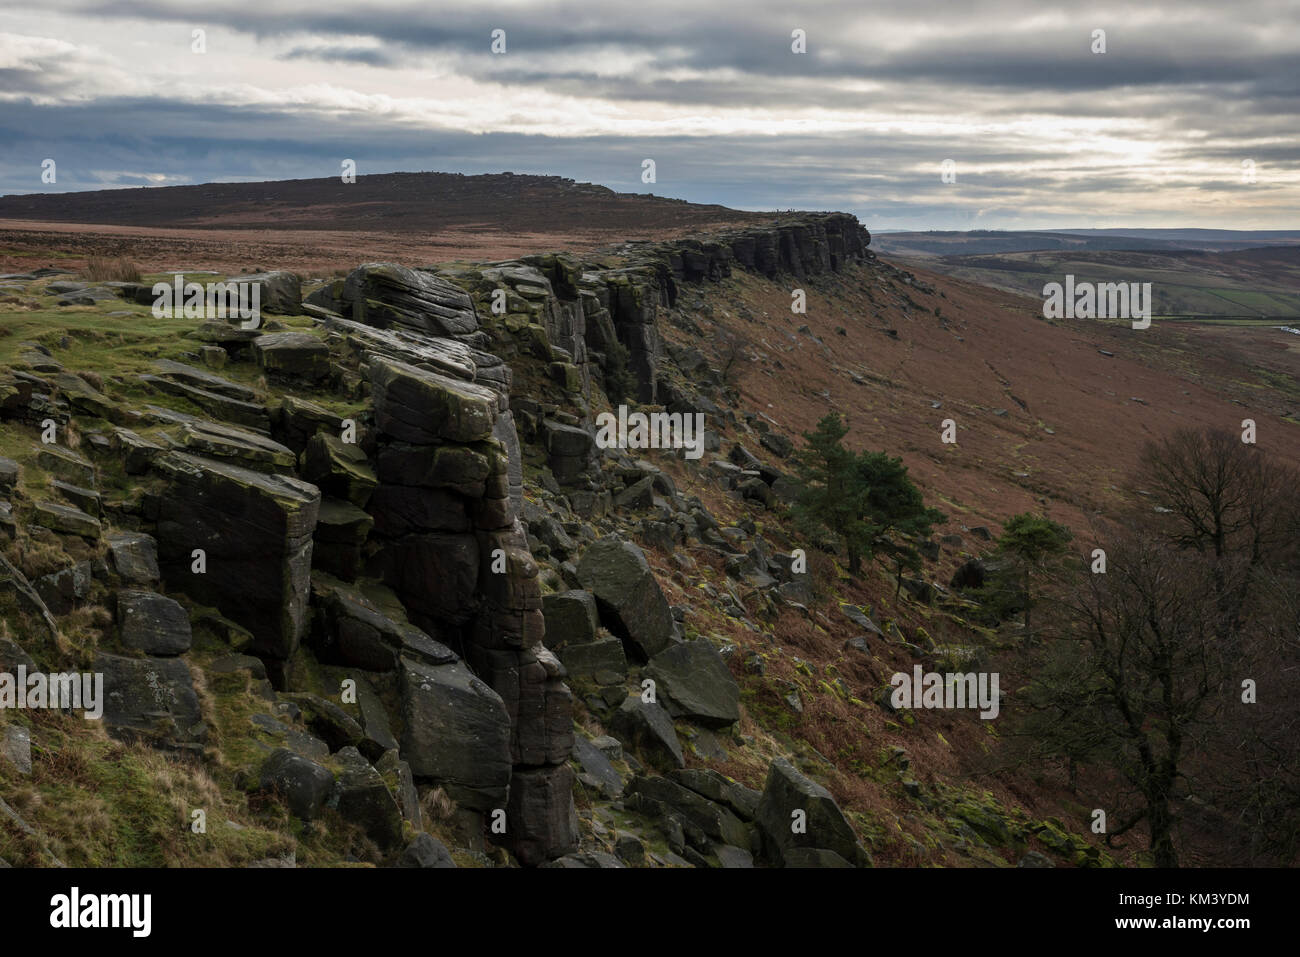 Rugged scenery of gritstone rocks on Stanage edge in the Peak District national park, Derbyshire, England. Stock Photo